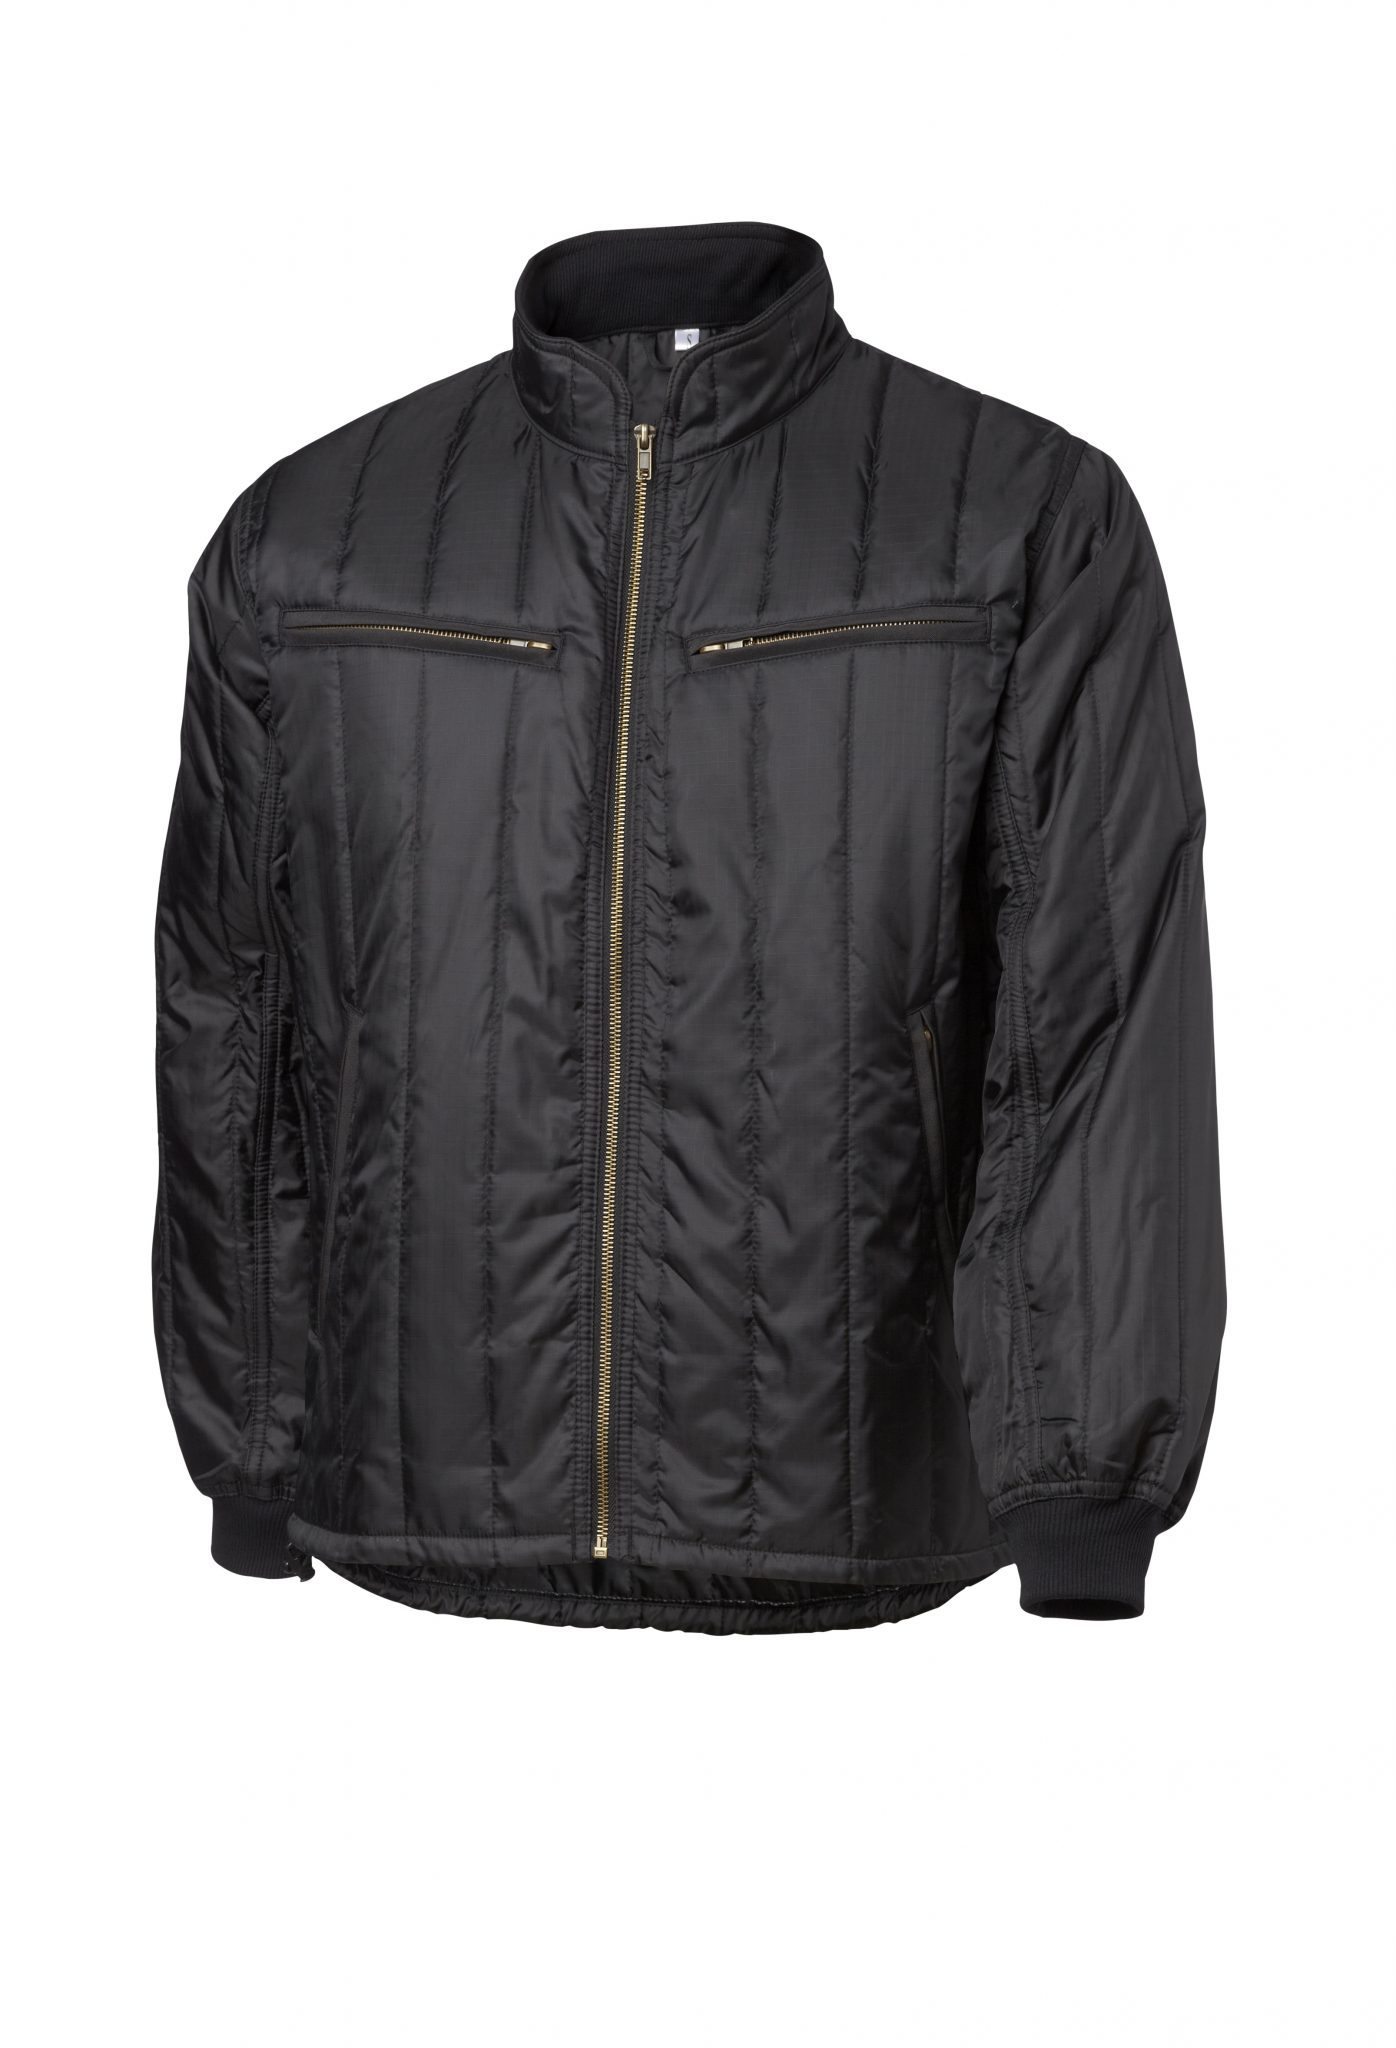 Thermal jacket - Viking Rubber Co.